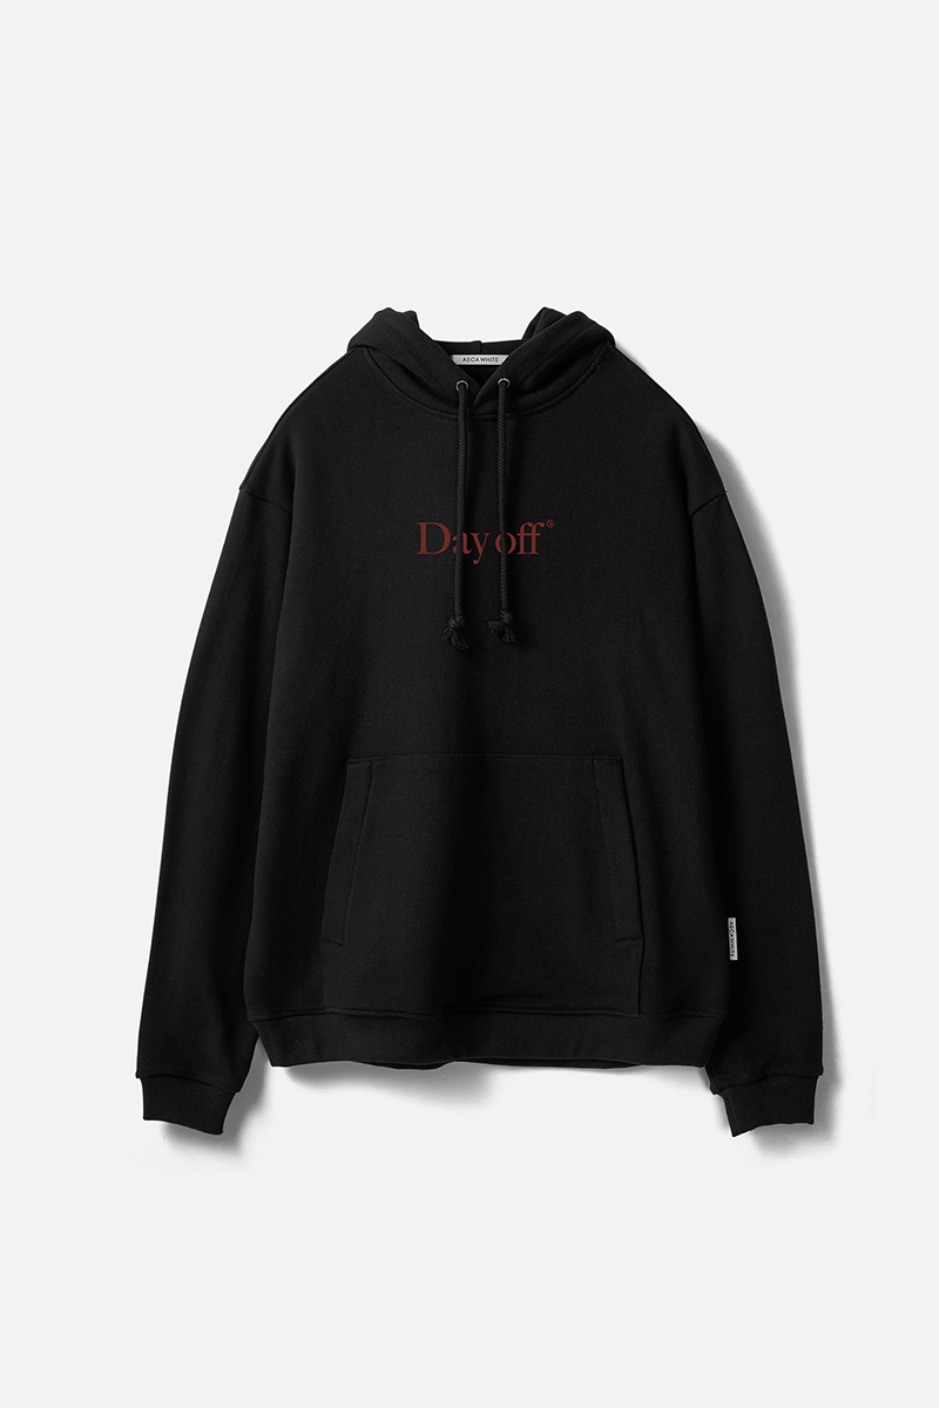 DAY OFF PULLOVER HOODIE-BLACK